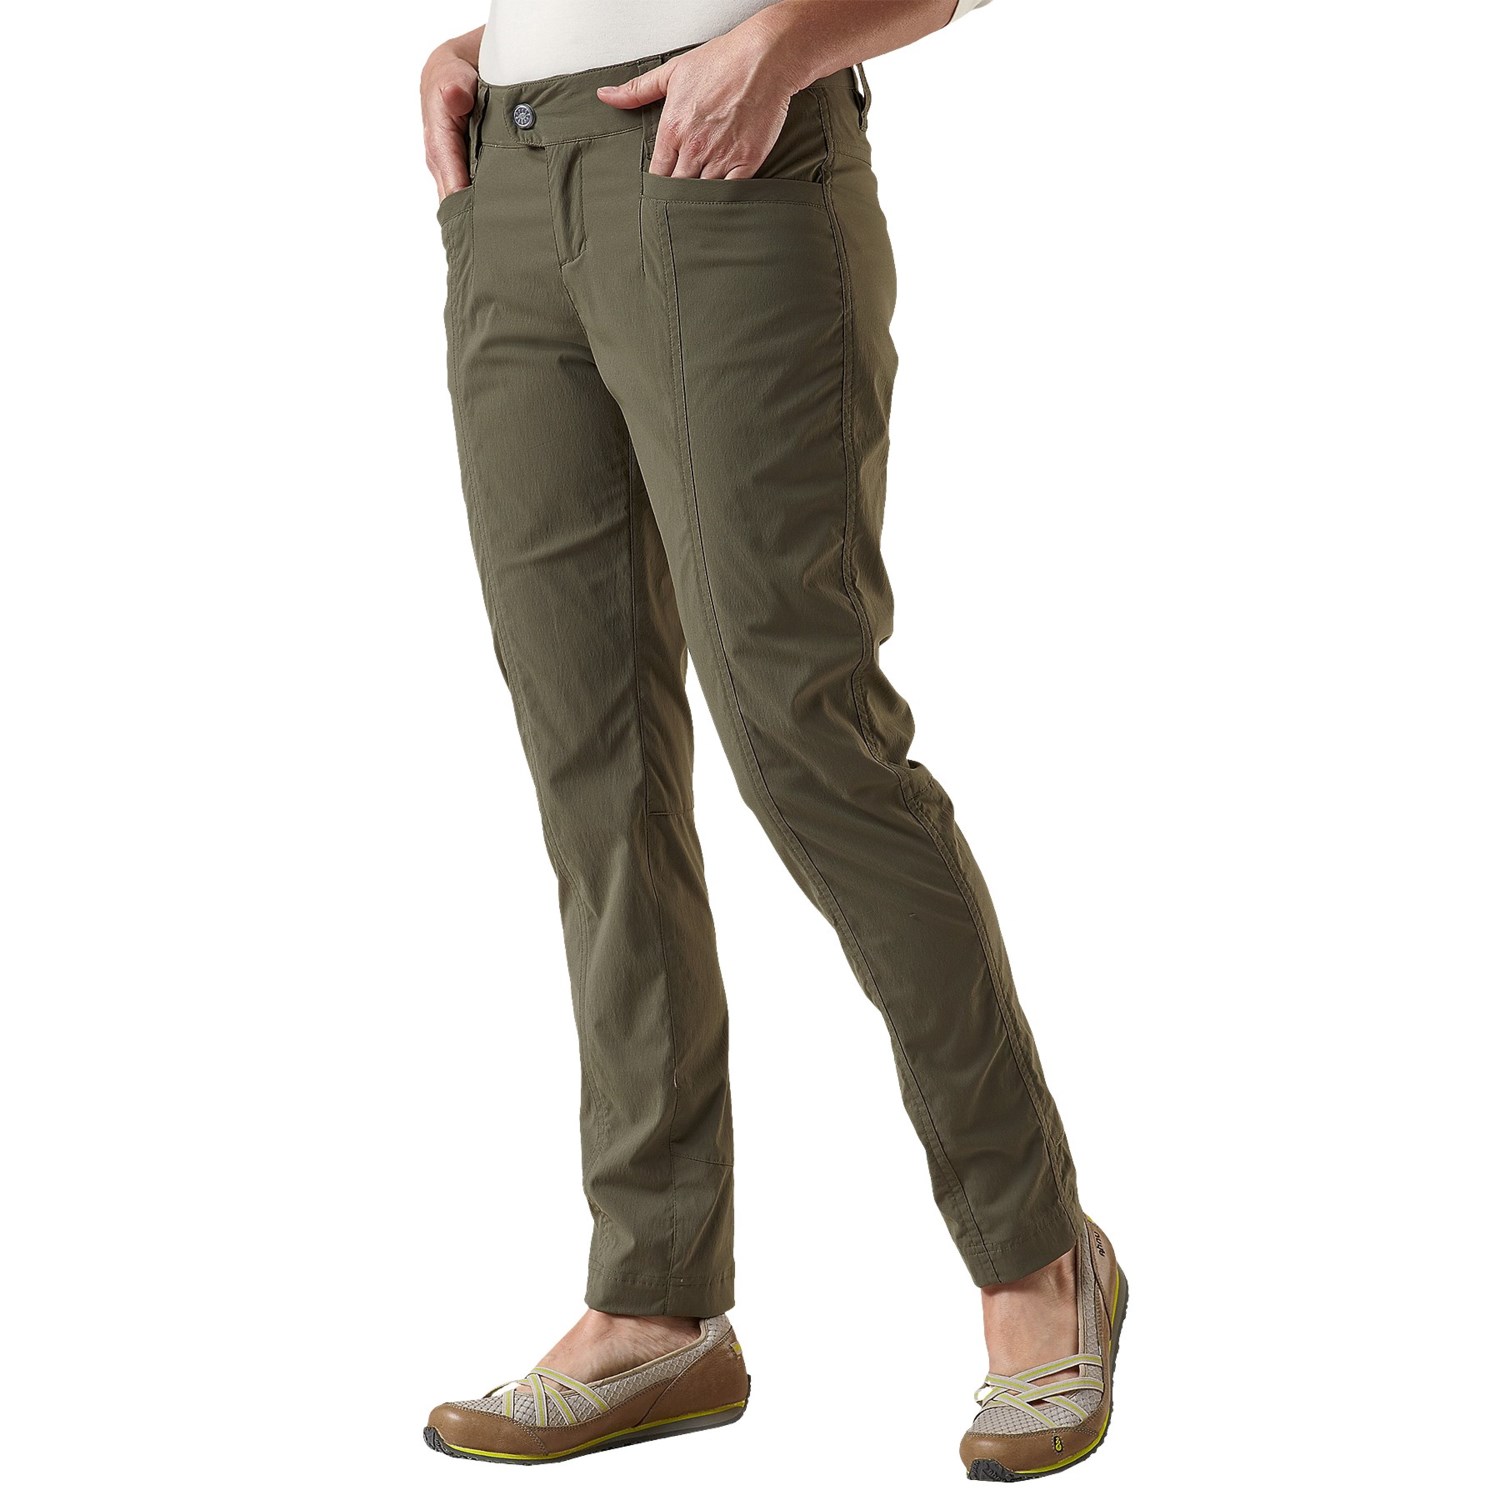 Royal Robbins Discovery Pencil Pants - UPF 50+ (For Women) - Save 40%